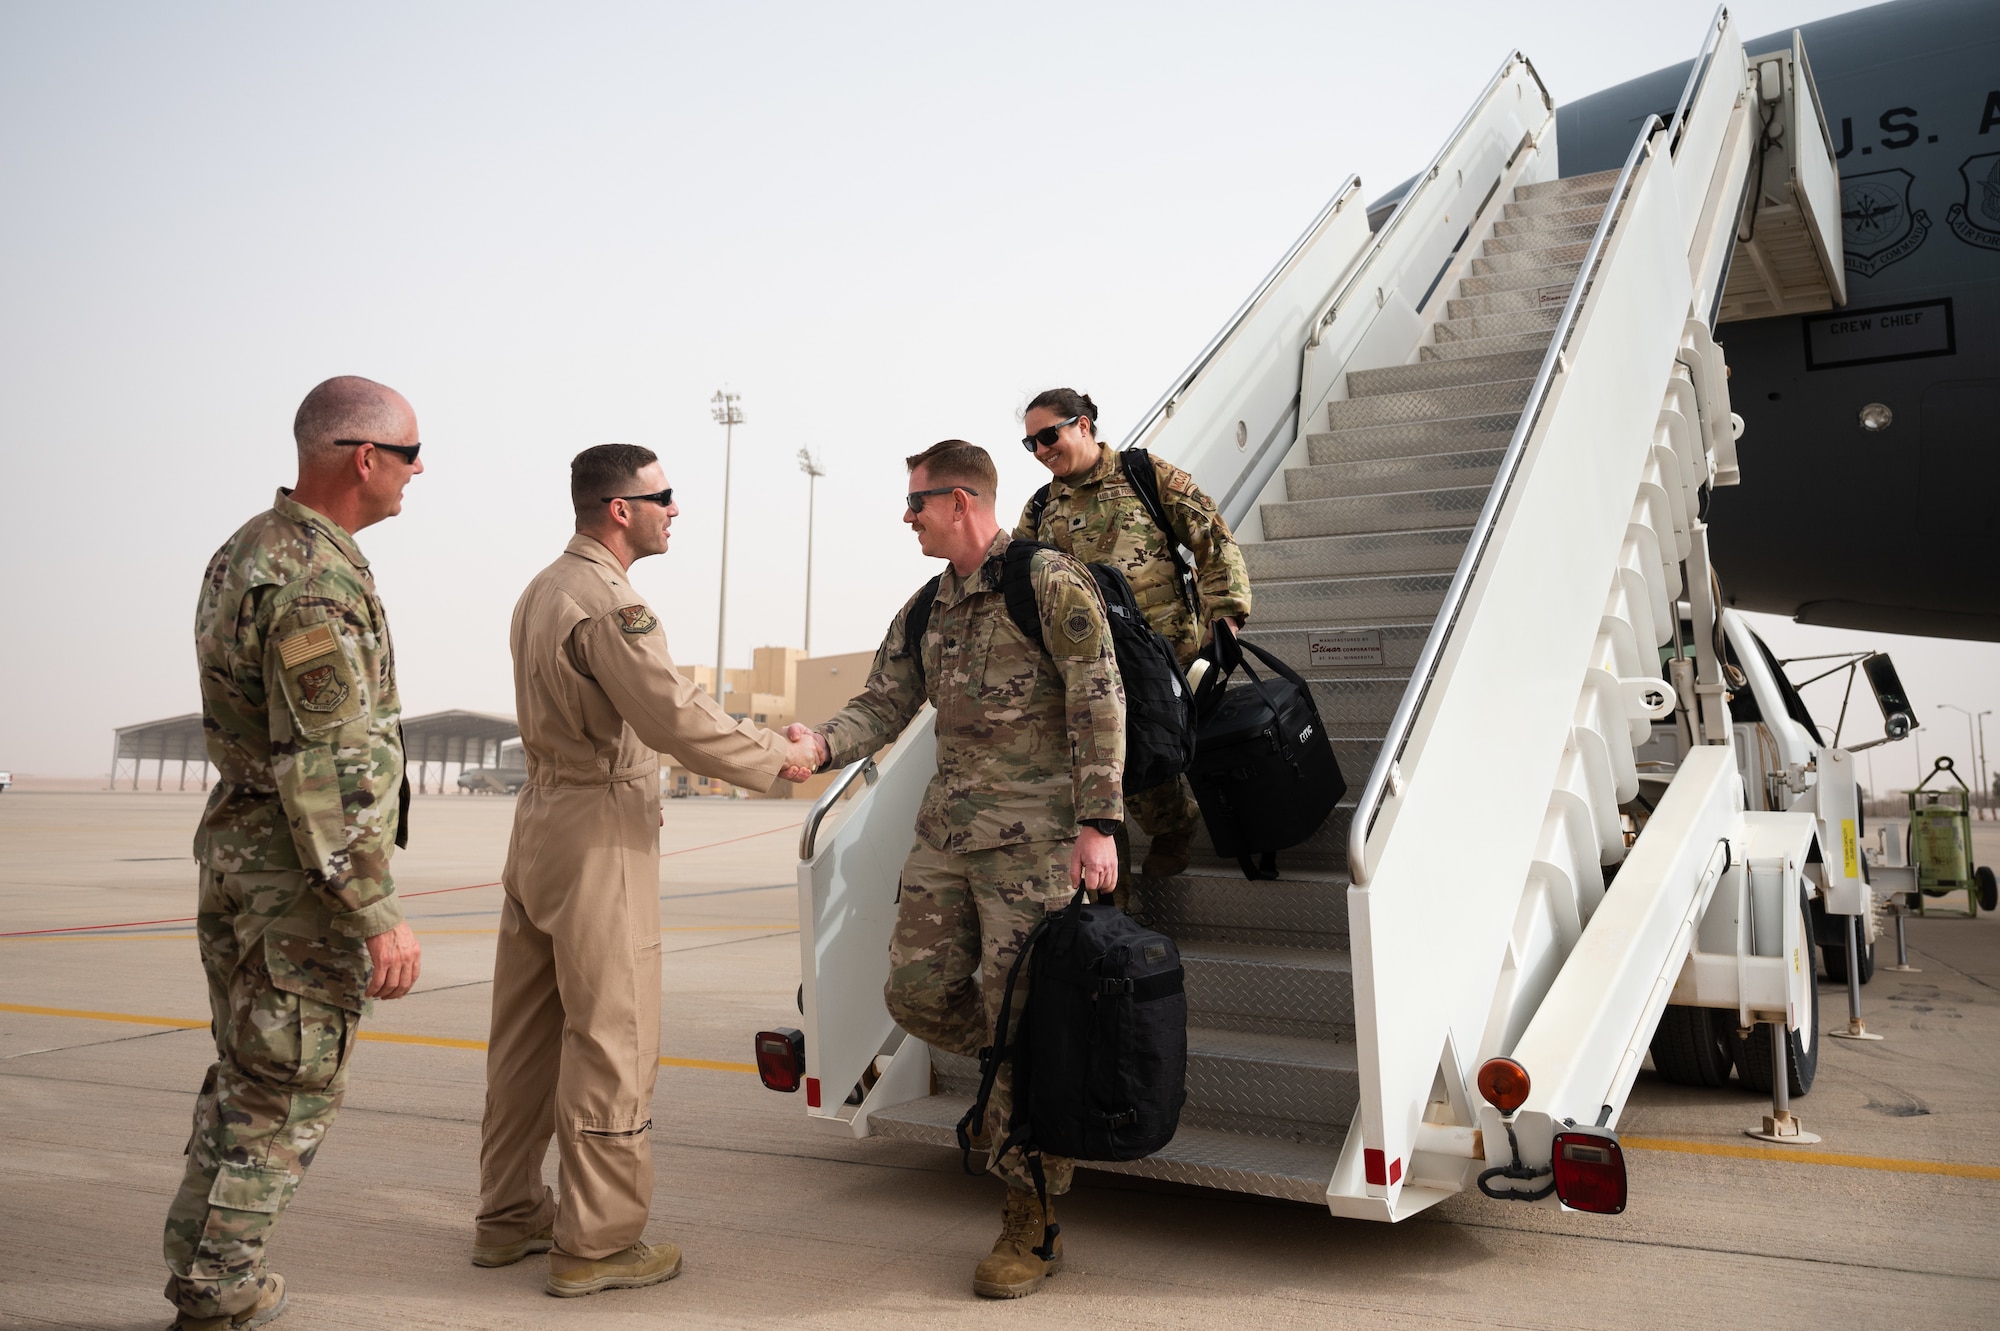 U.S. Air Force Brig. Gen. Robert Davis, 378th Air Expeditionary Wing commander, greets Airmen at Prince Sultan Air Base, Kingdom of Saudi Arabia, March 6, 2022. Previously stationed at Al Dhafra Air Base, United Arab Emirates, the 380th Expeditionary Aircraft Maintenance Squadron and 908th Expeditionary Air Refueling Squadron will now operate out of PSAB. (U.S. Air Force photo by Senior Airman Jacob B. Wrightsman)